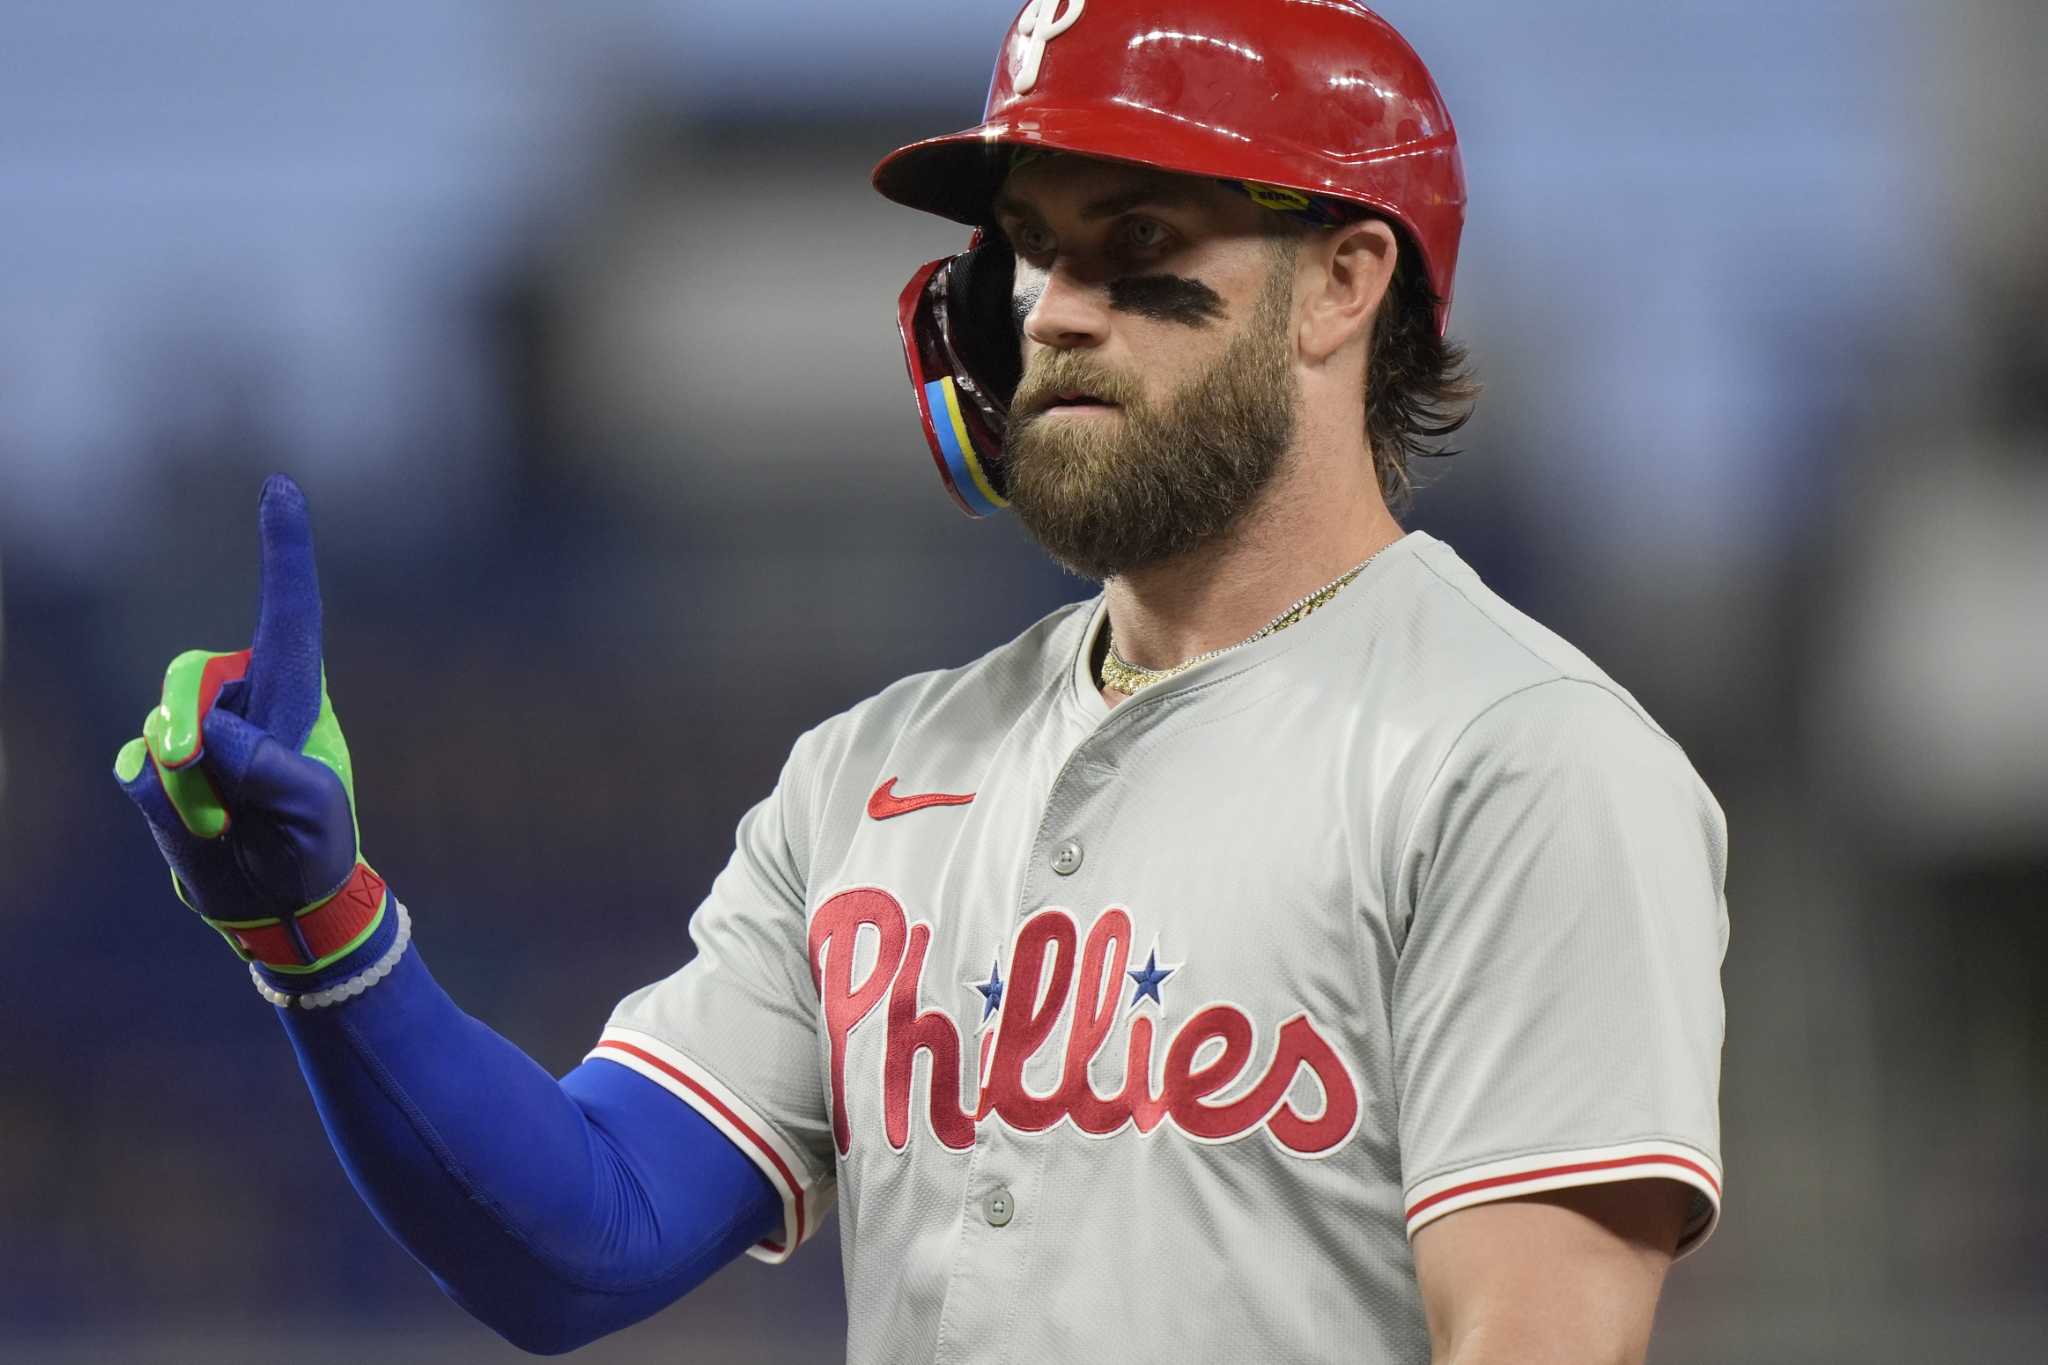 Bryce Harper scratched from Phillies' lineup with migraine